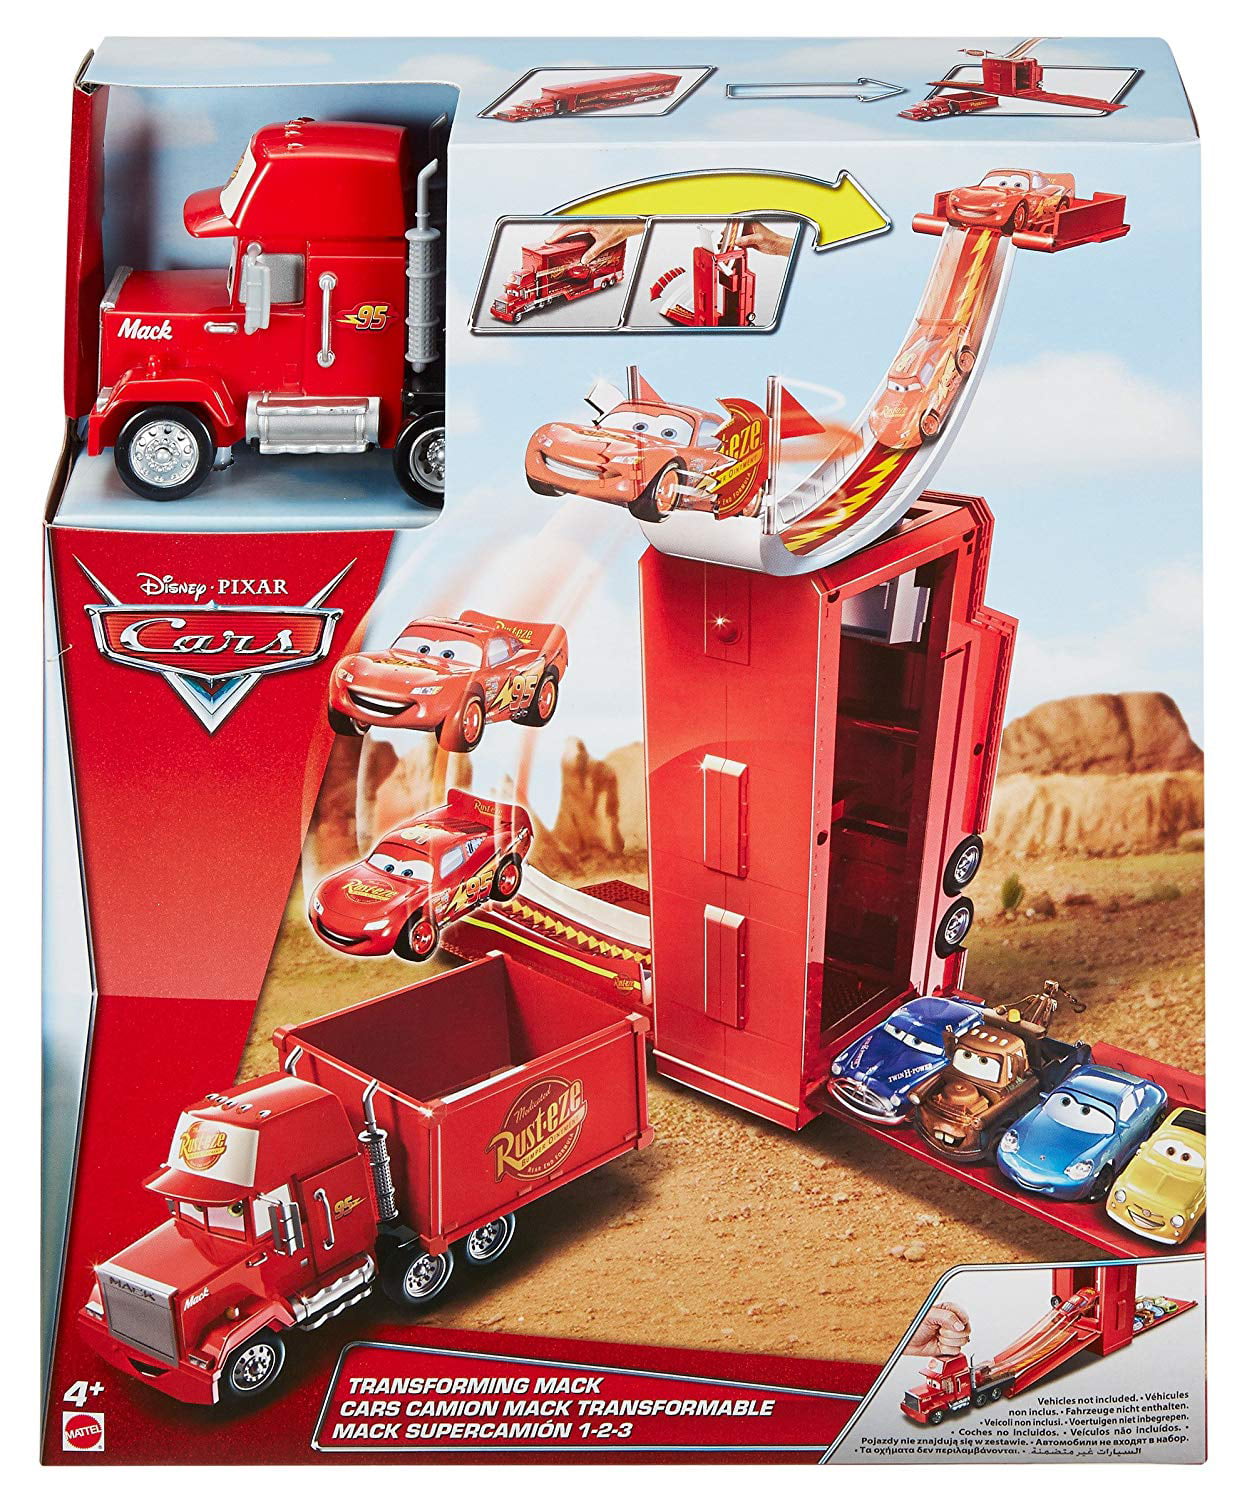 Disney Pixar Cars Transforming Mack Playset With This Tower Jump You Get Two Ways To Play With